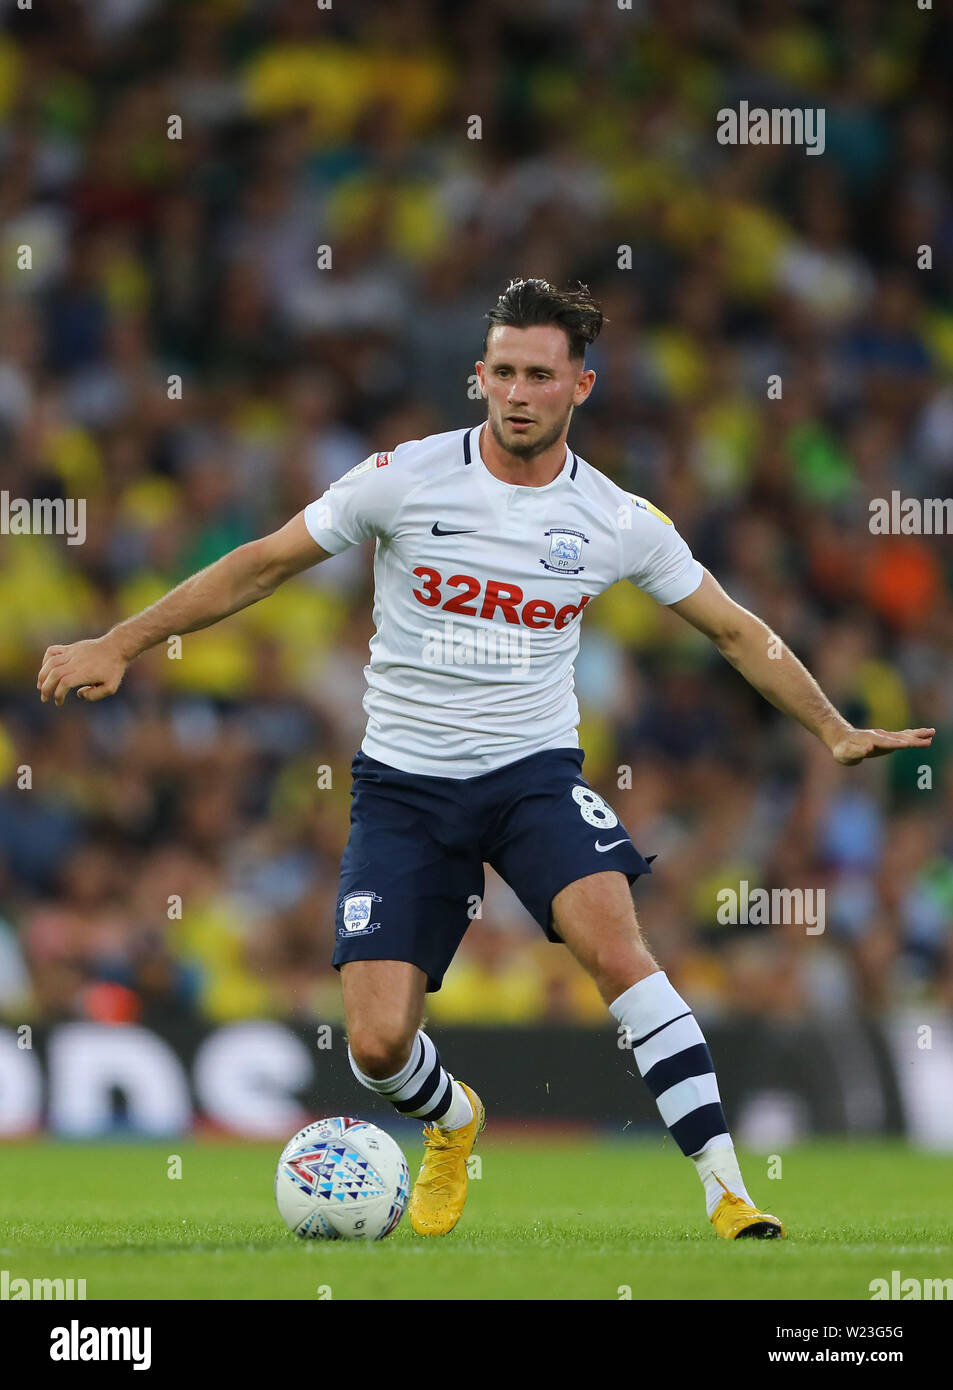 Alan Browne of Preston North End - Norwich City v Preston North End, Sky Bet Championship, Carrow Road, Norwich - 22nd August 2018 Stock Photo